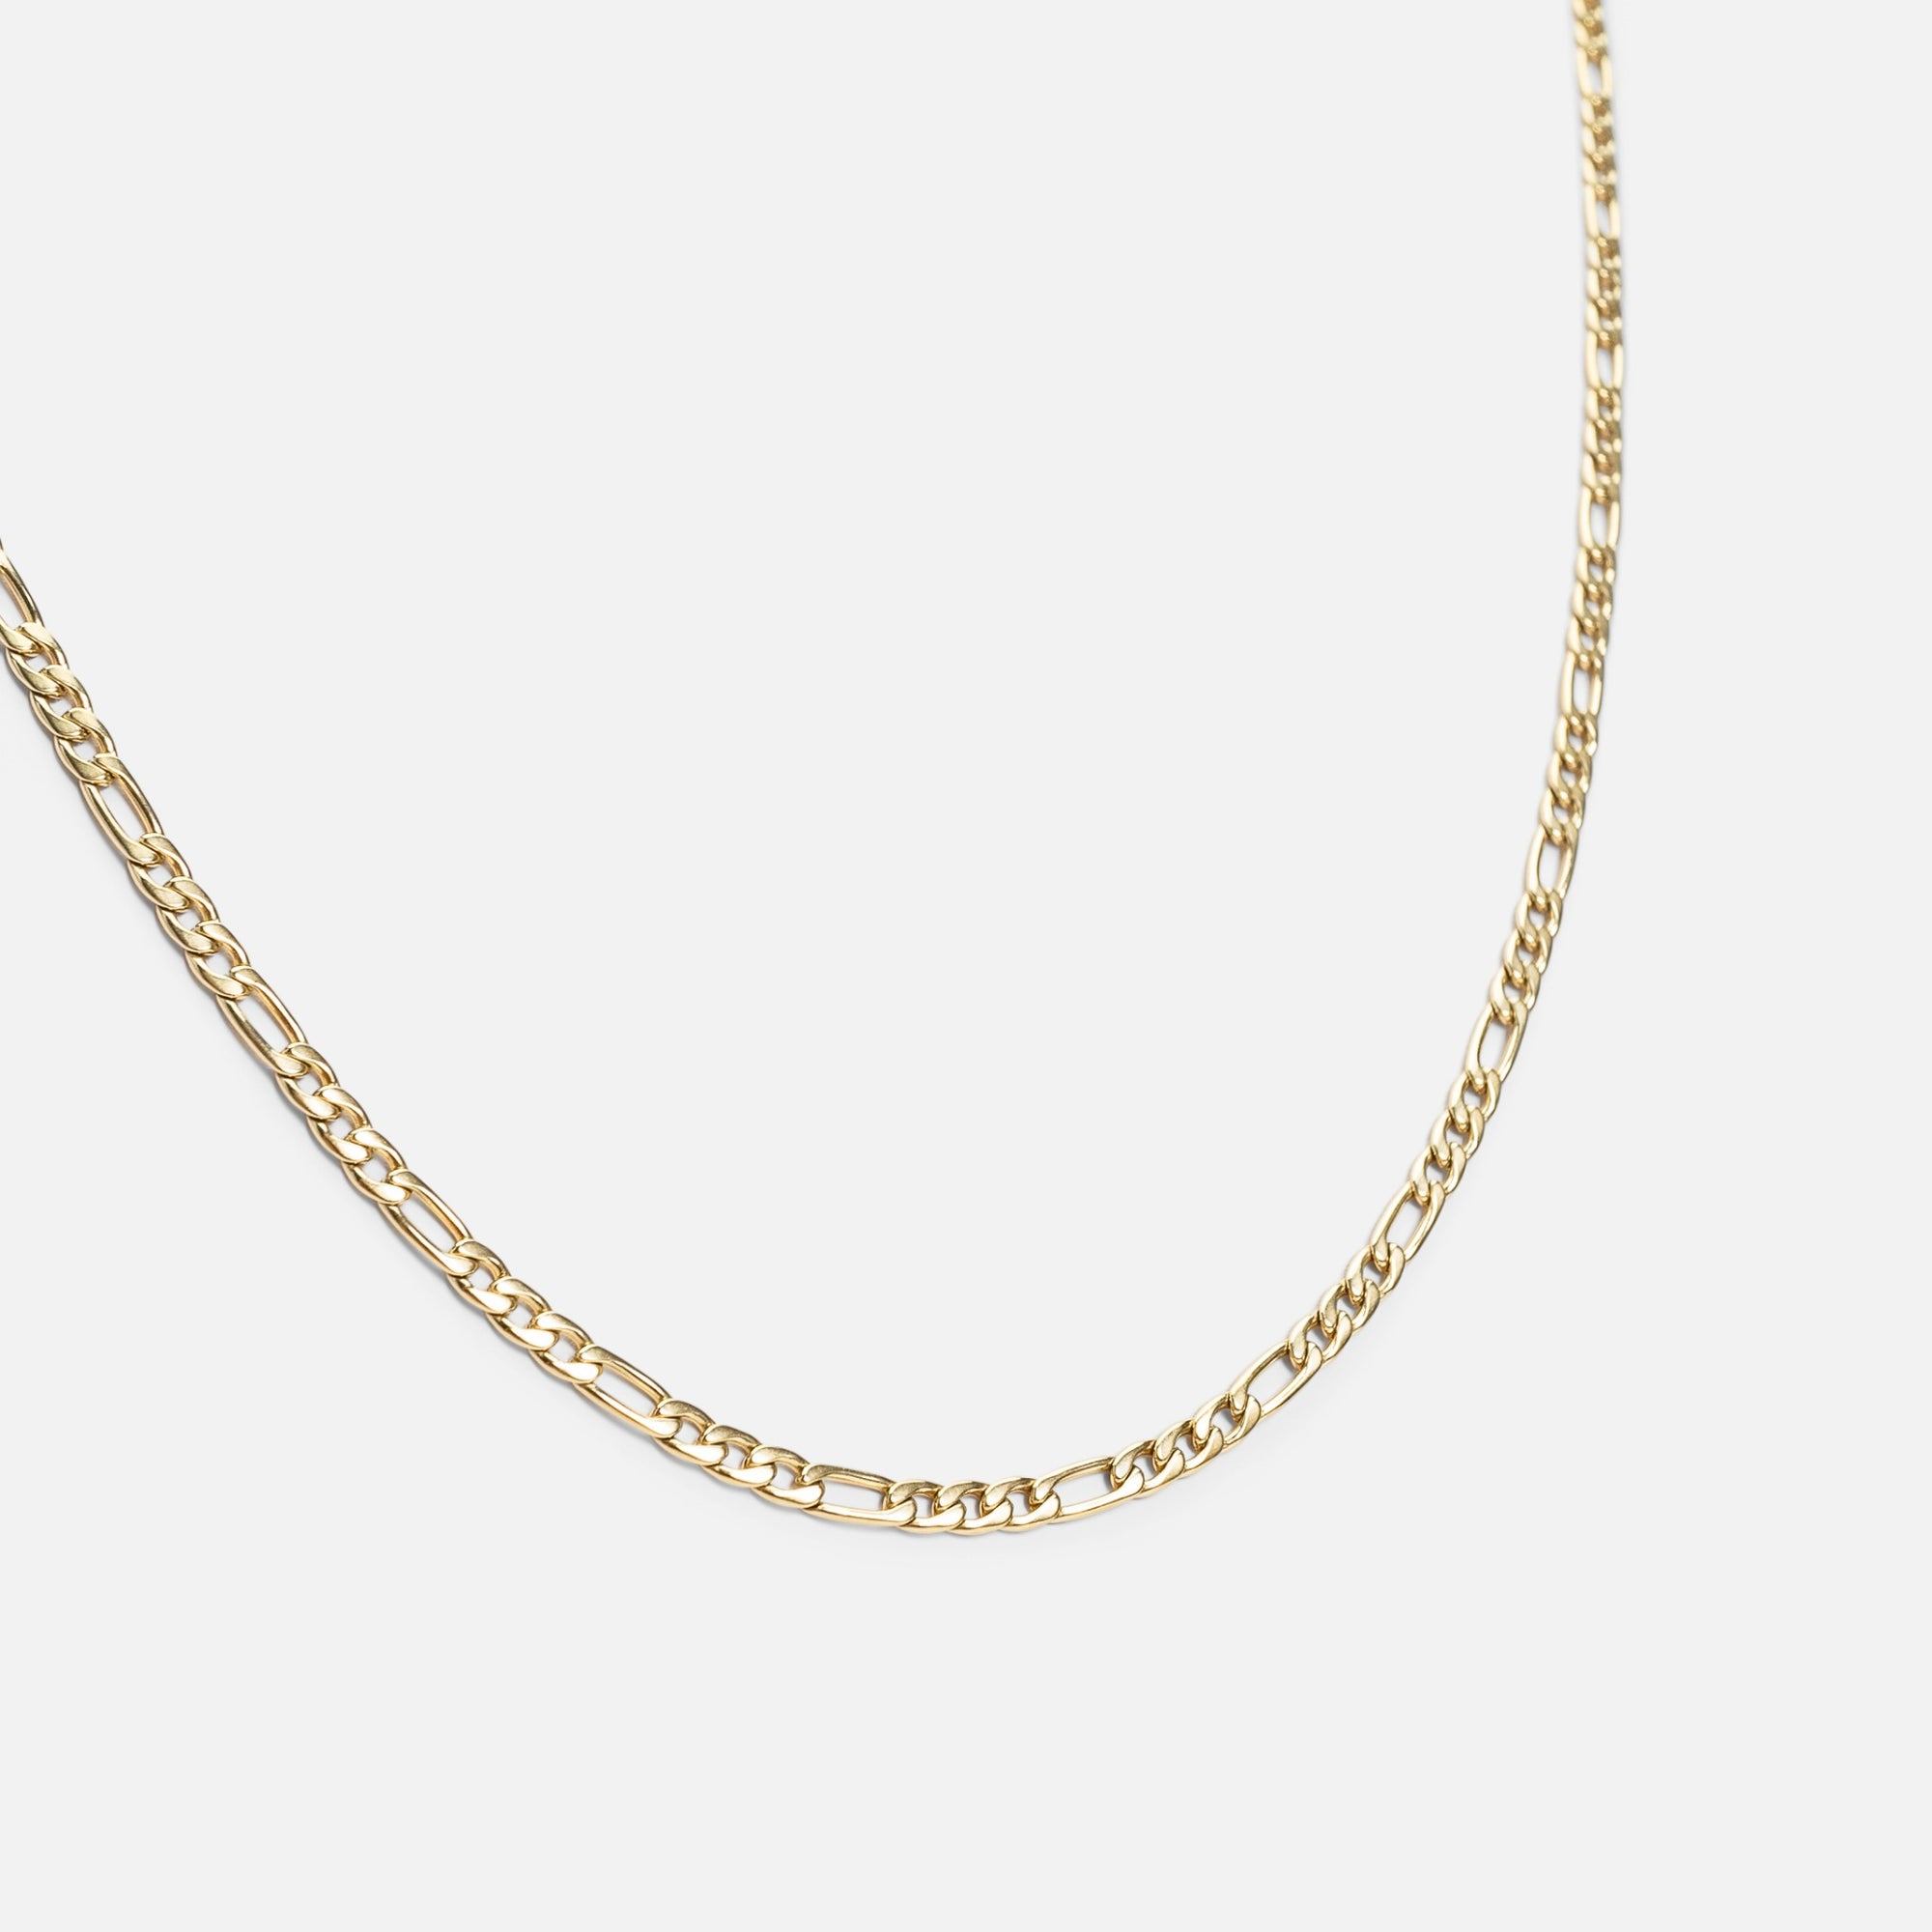 Golden chain necklace with figaro mesh in stainless steel